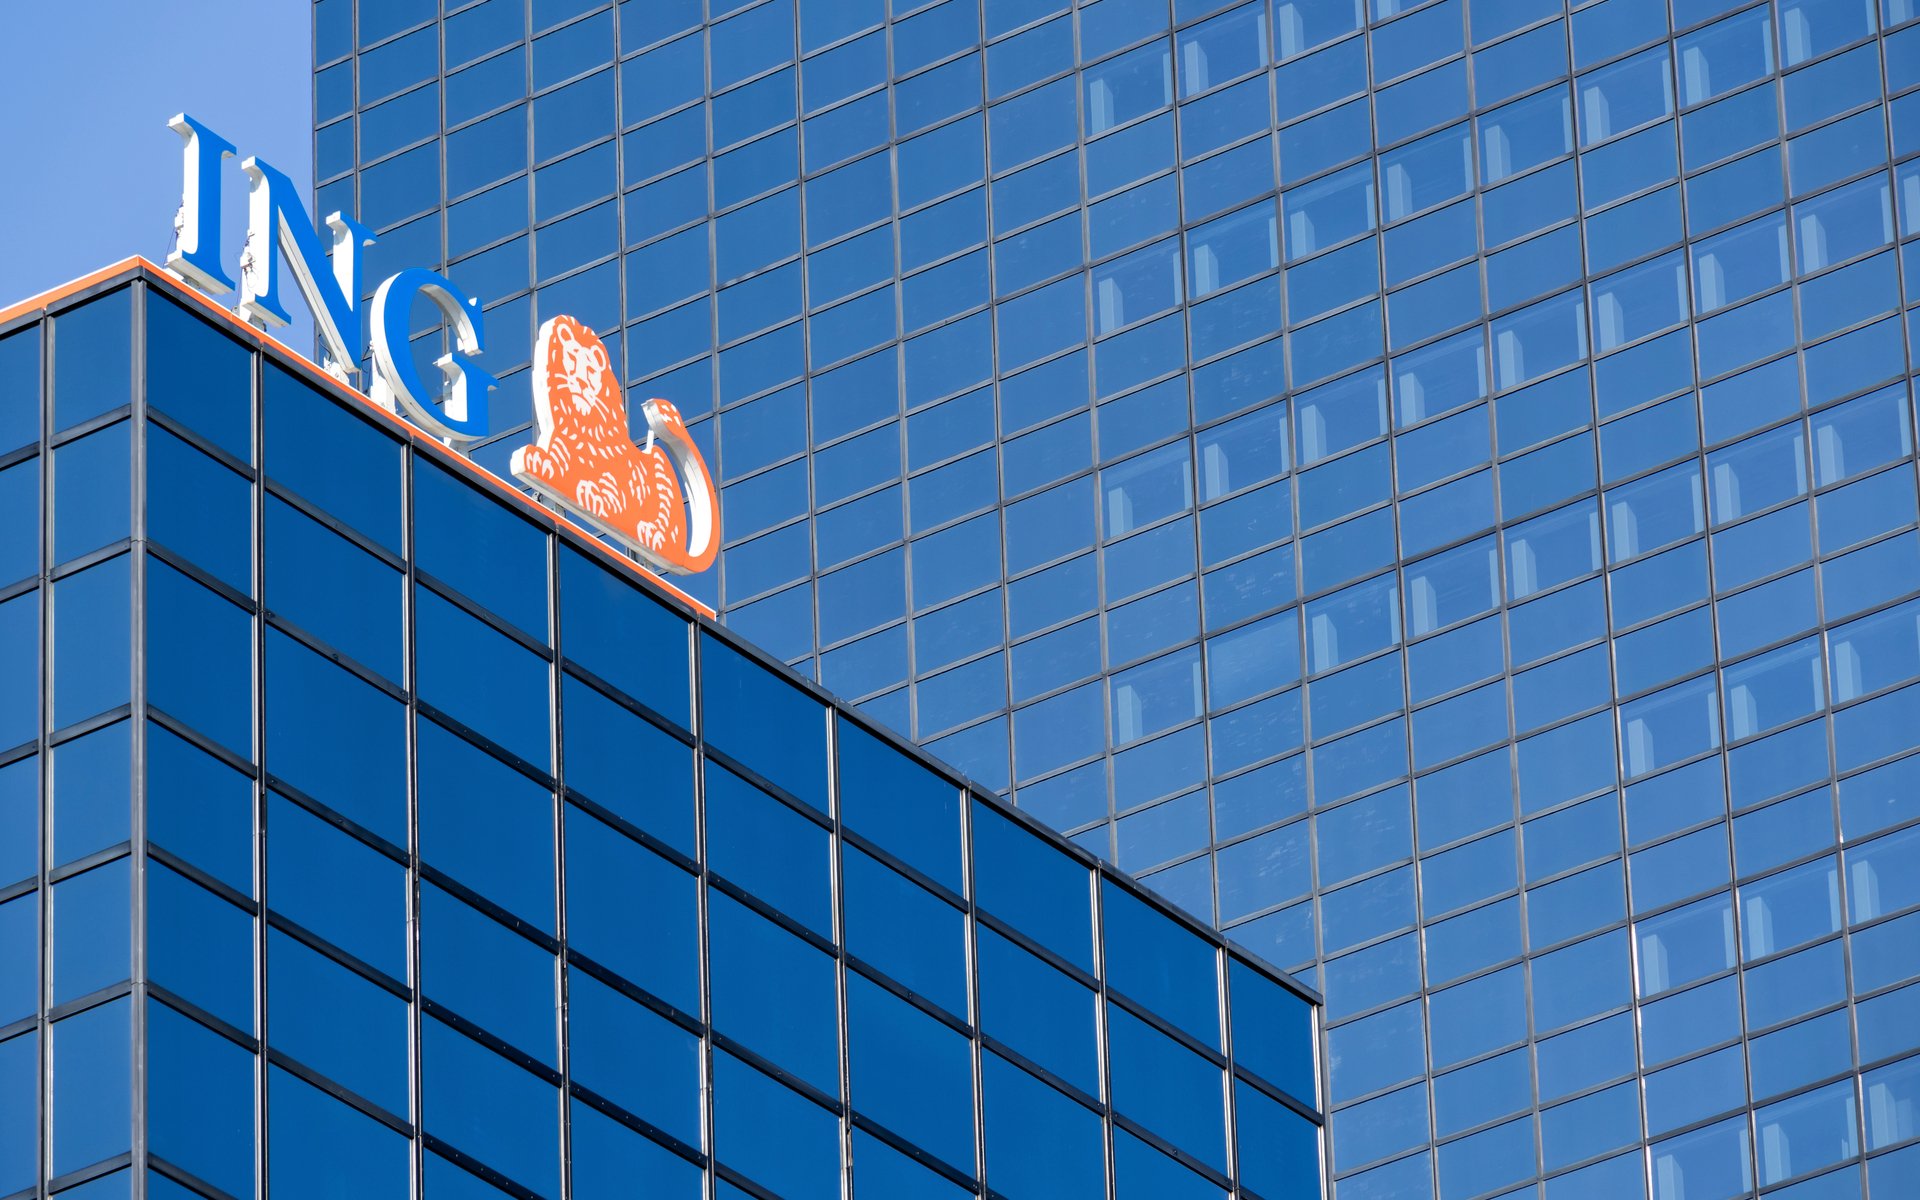 ING: Interest in Cryptocurrency Expected to Double (At Least)